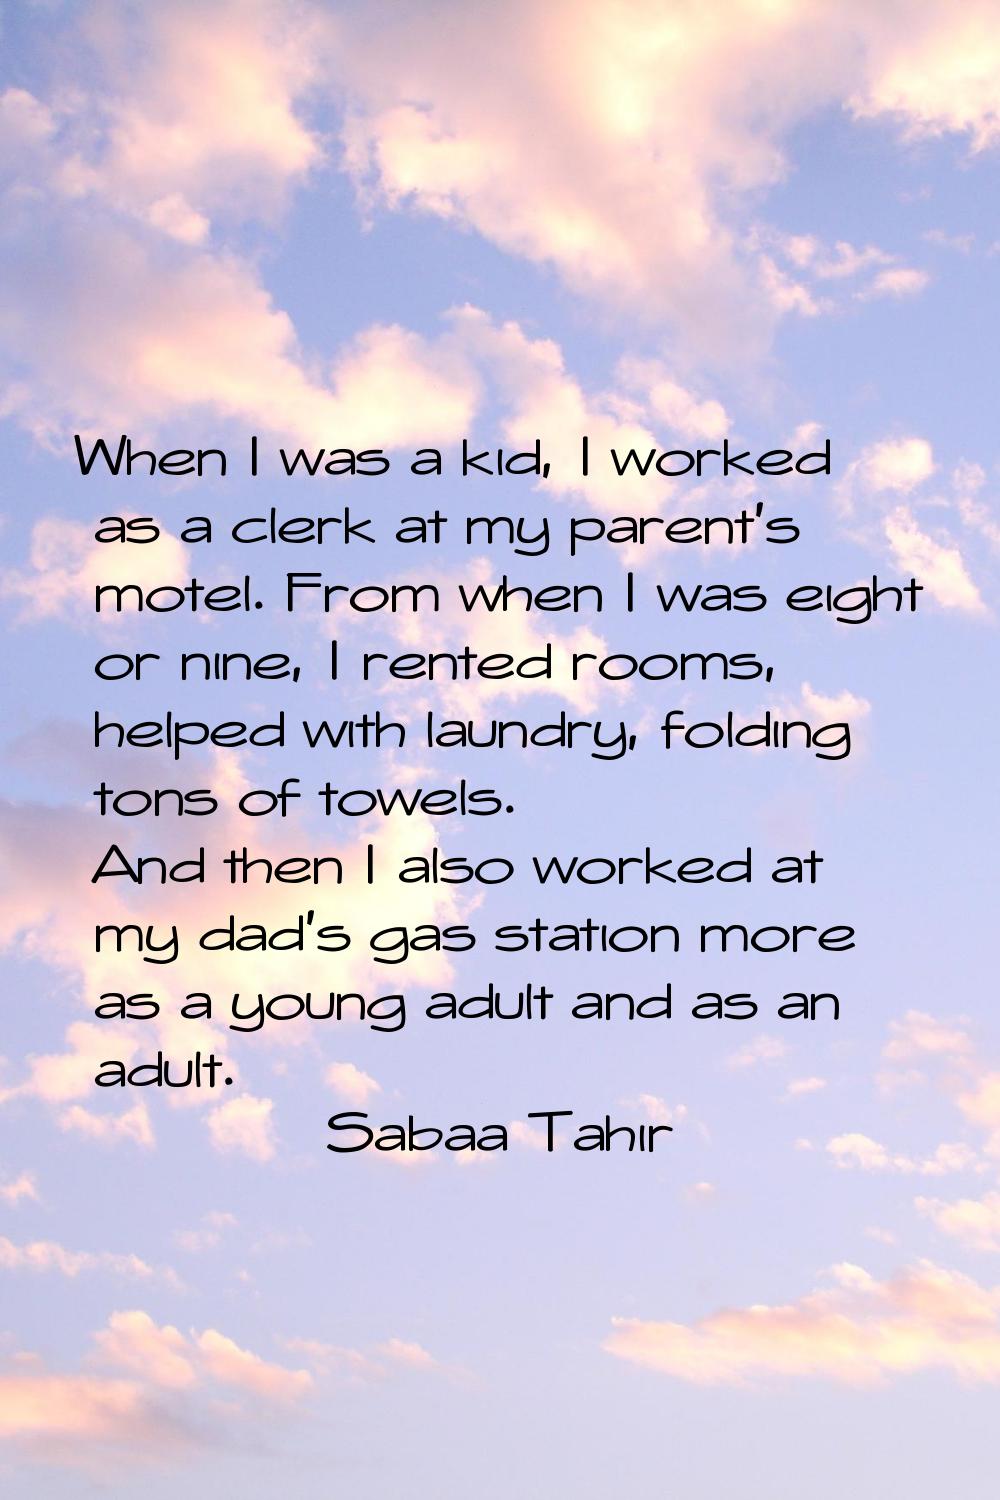 When I was a kid, I worked as a clerk at my parent's motel. From when I was eight or nine, I rented